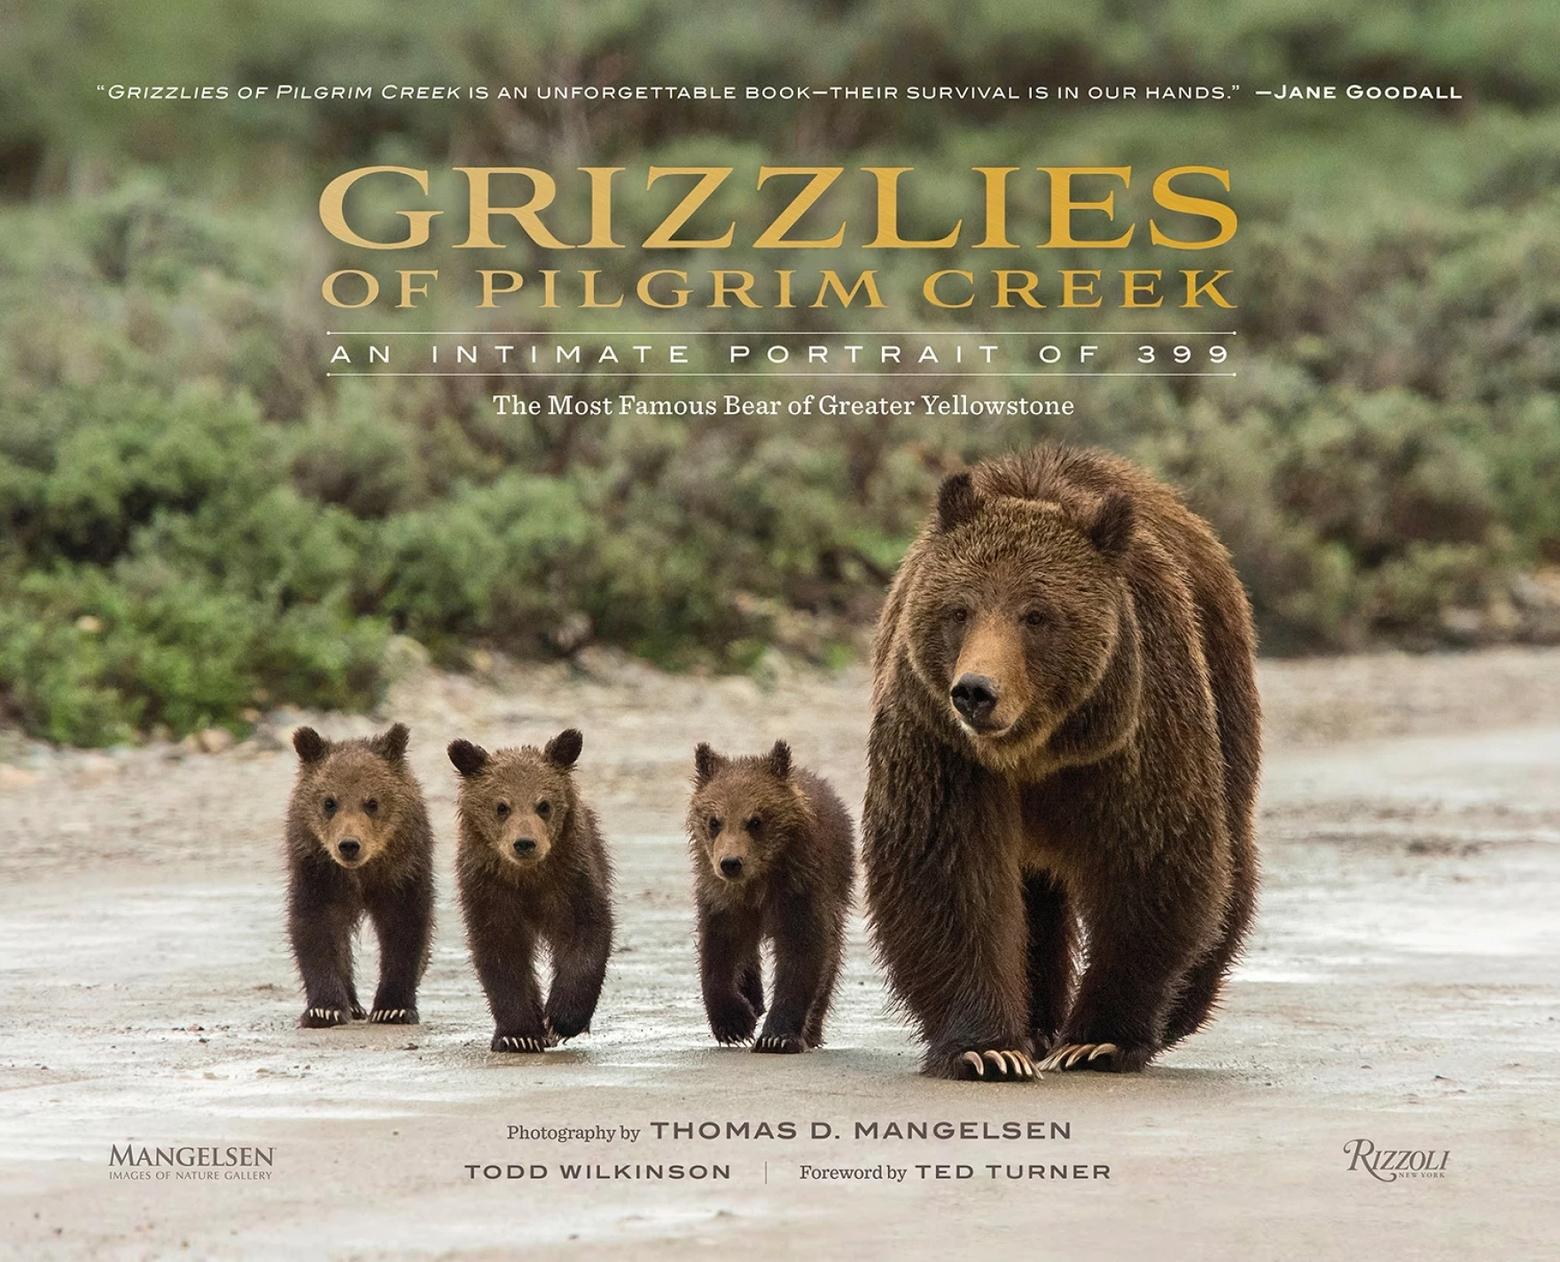 "Grizzlies of Pilgrim Creek" was Mangelsen's first book about famed Grizzly 399. Photo courtesy Thomas D. Mangelsen